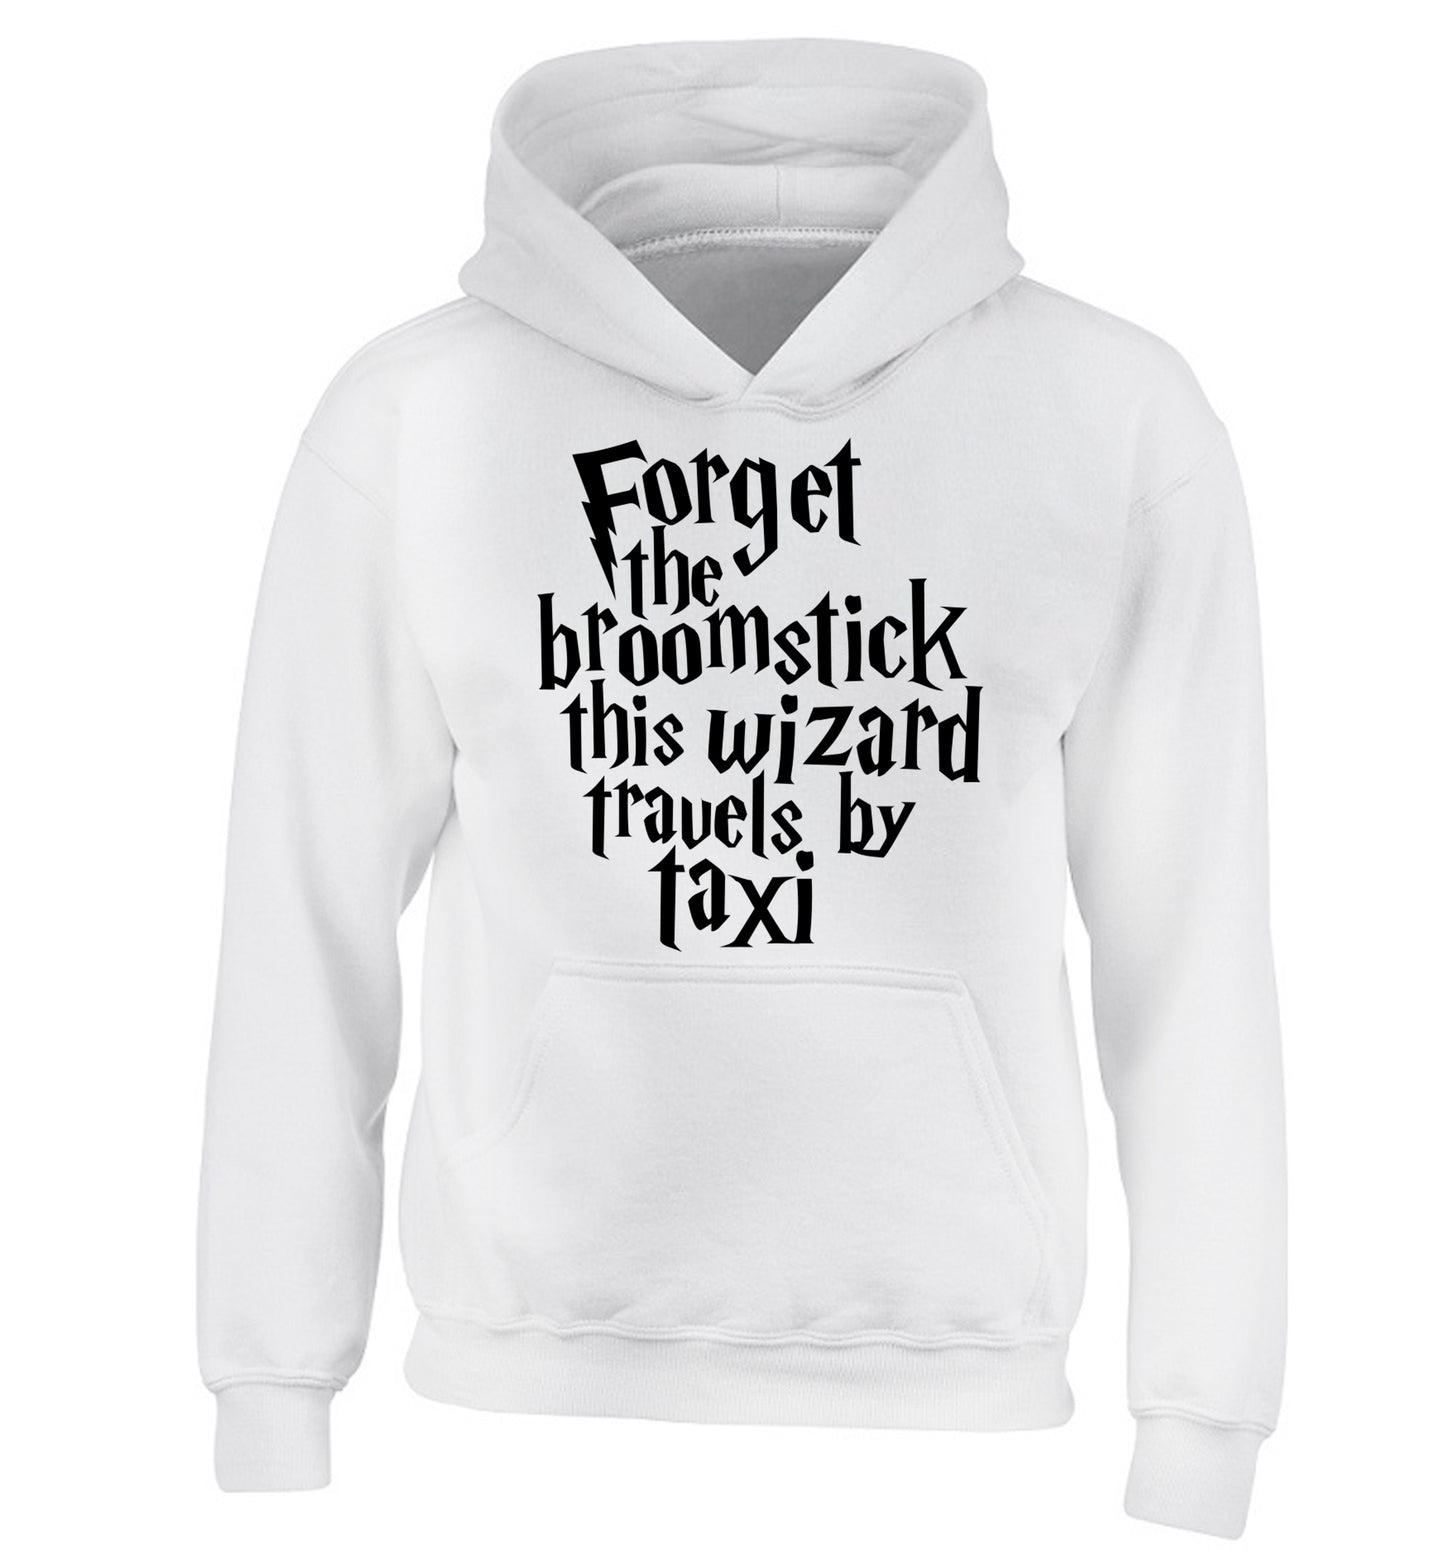 Forget the broomstick this wizard travels by taxi children's white hoodie 12-14 Years